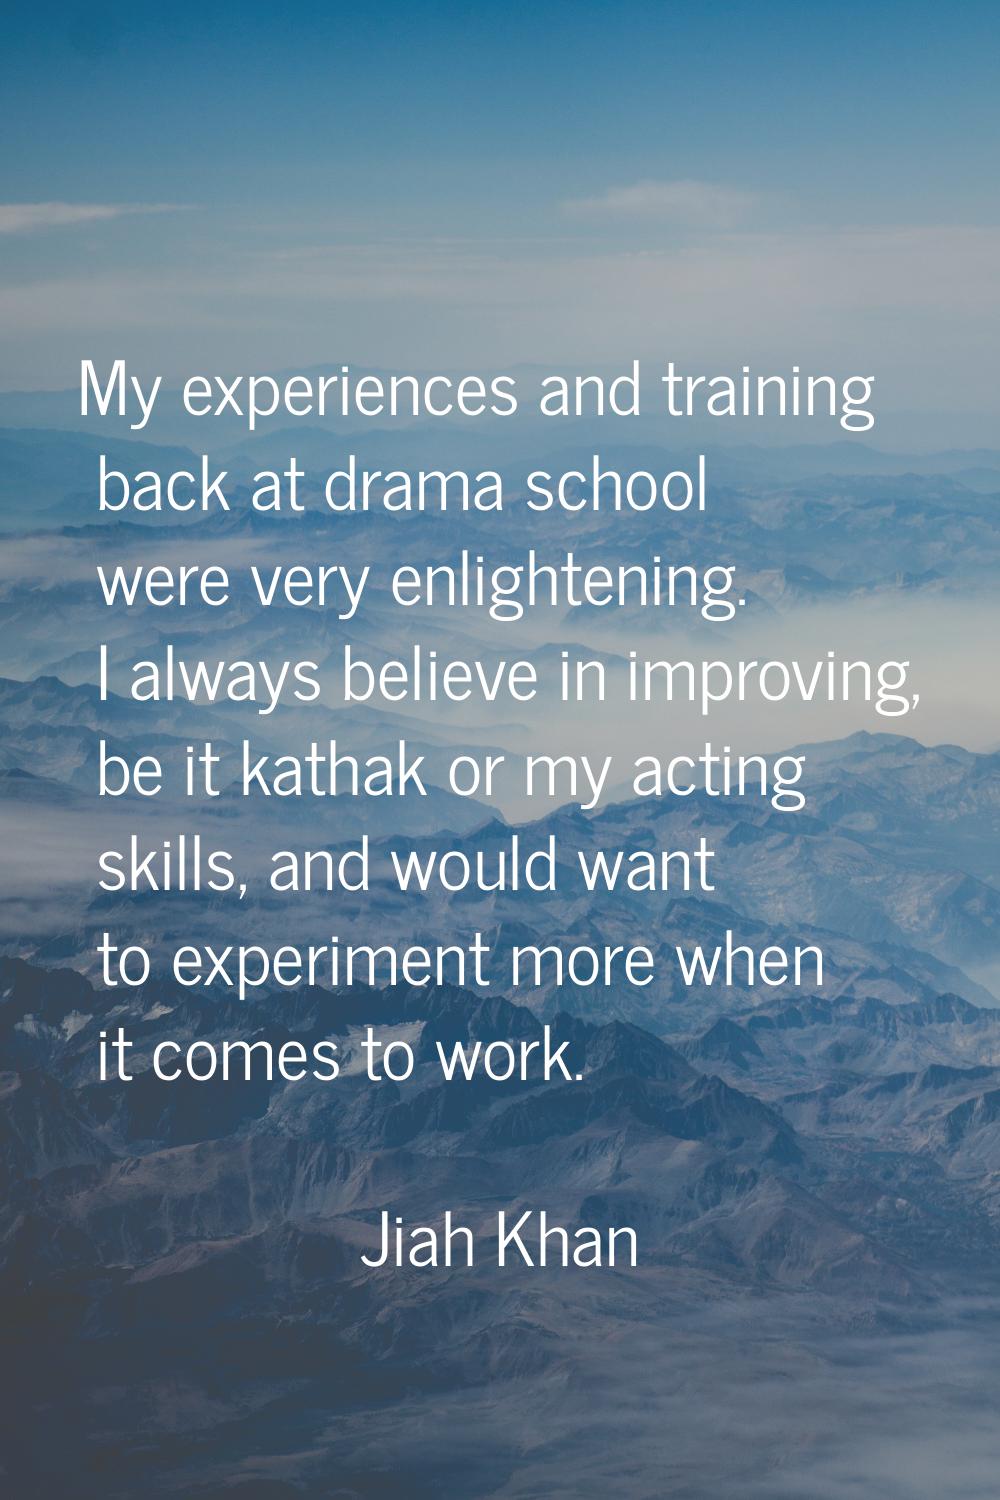 My experiences and training back at drama school were very enlightening. I always believe in improv